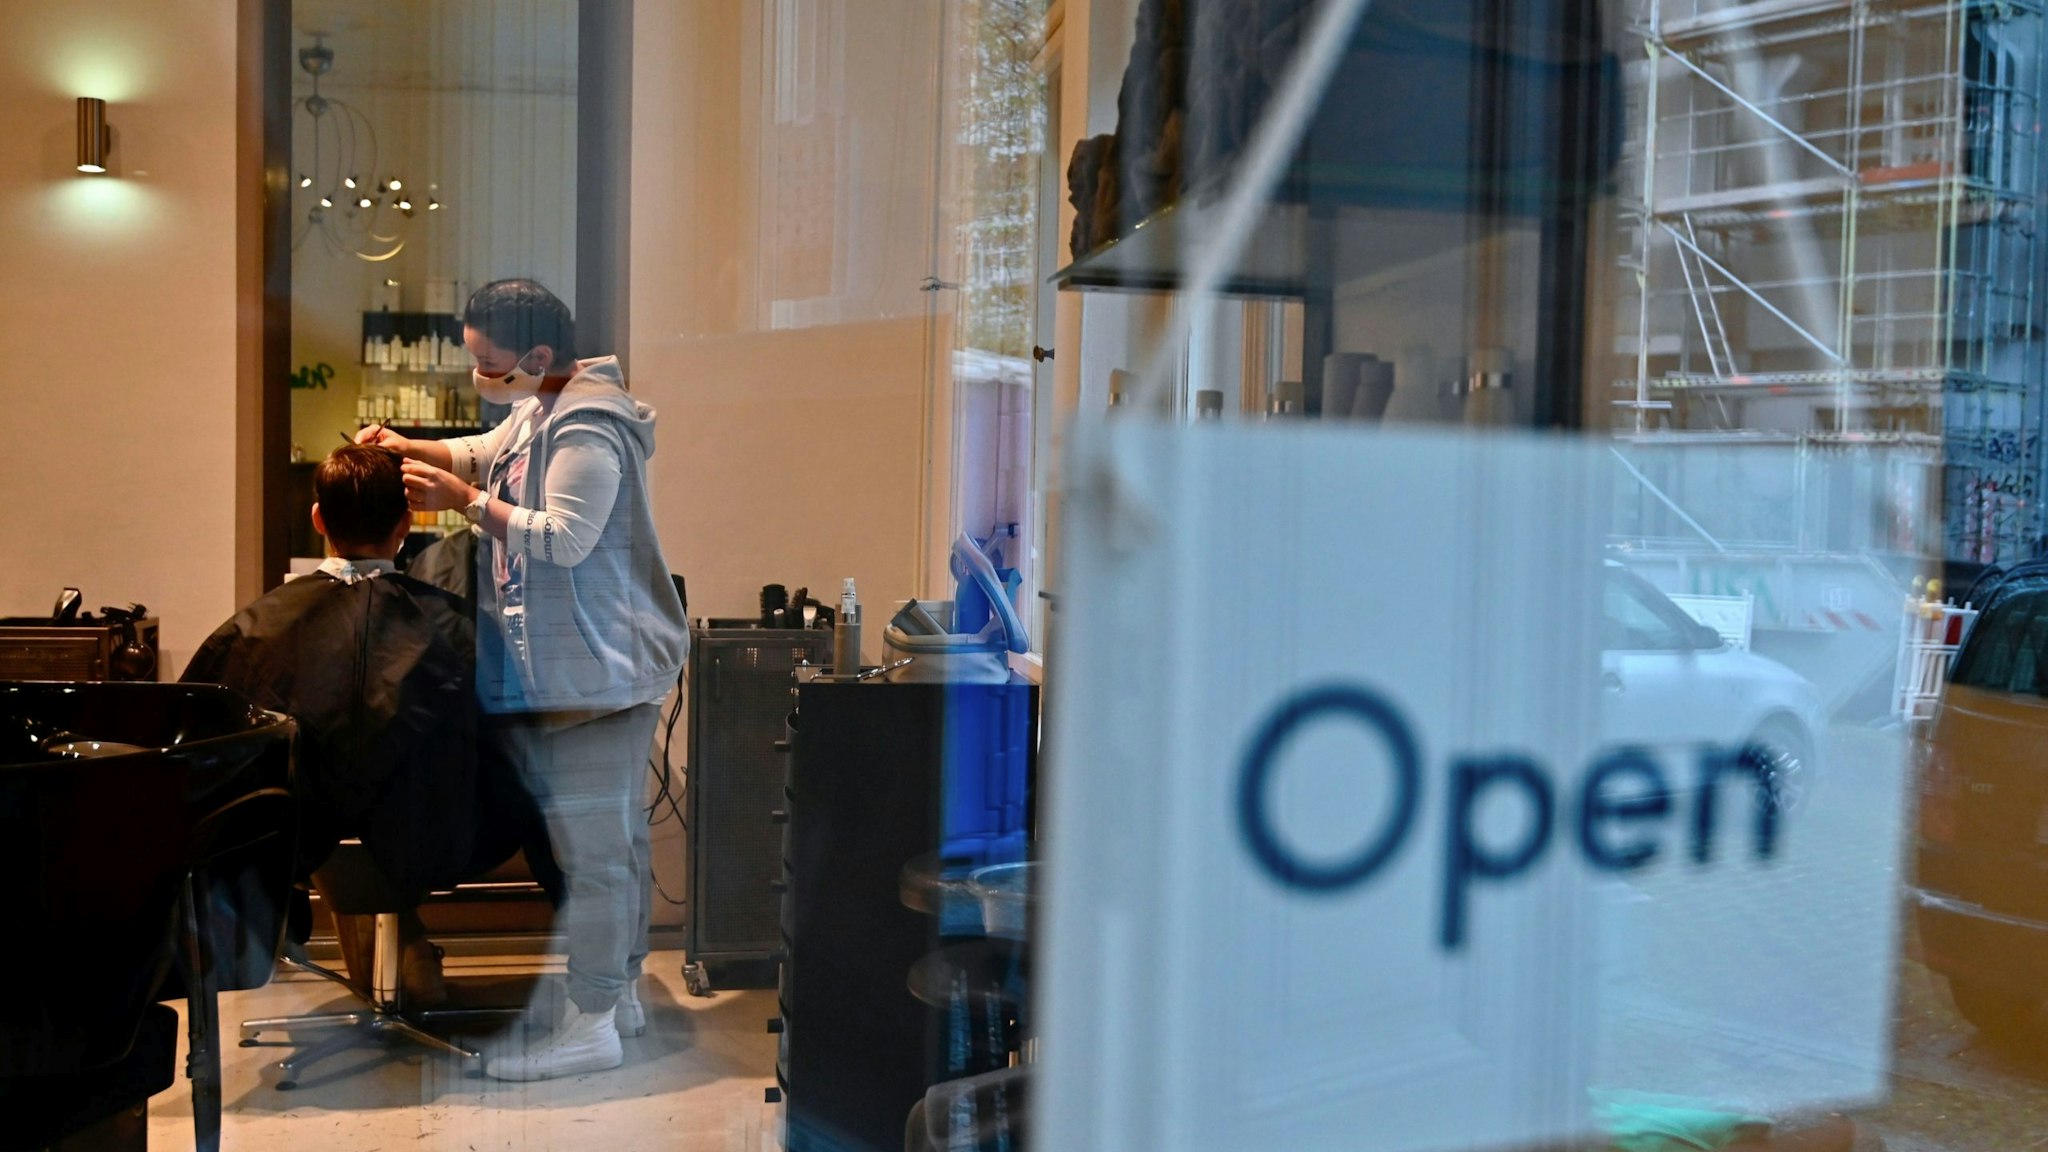 An open sign hangs in the window as a hairdresser cuts a customer's hair during the first day of reopening in Berlin on May 4, 2020 amid the novel coronavirus COVID-19 pandemic. (Photo by Tobias Schwarz / AFP) (Photo by TOBIAS SCHWARZ/AFP via Getty Images)